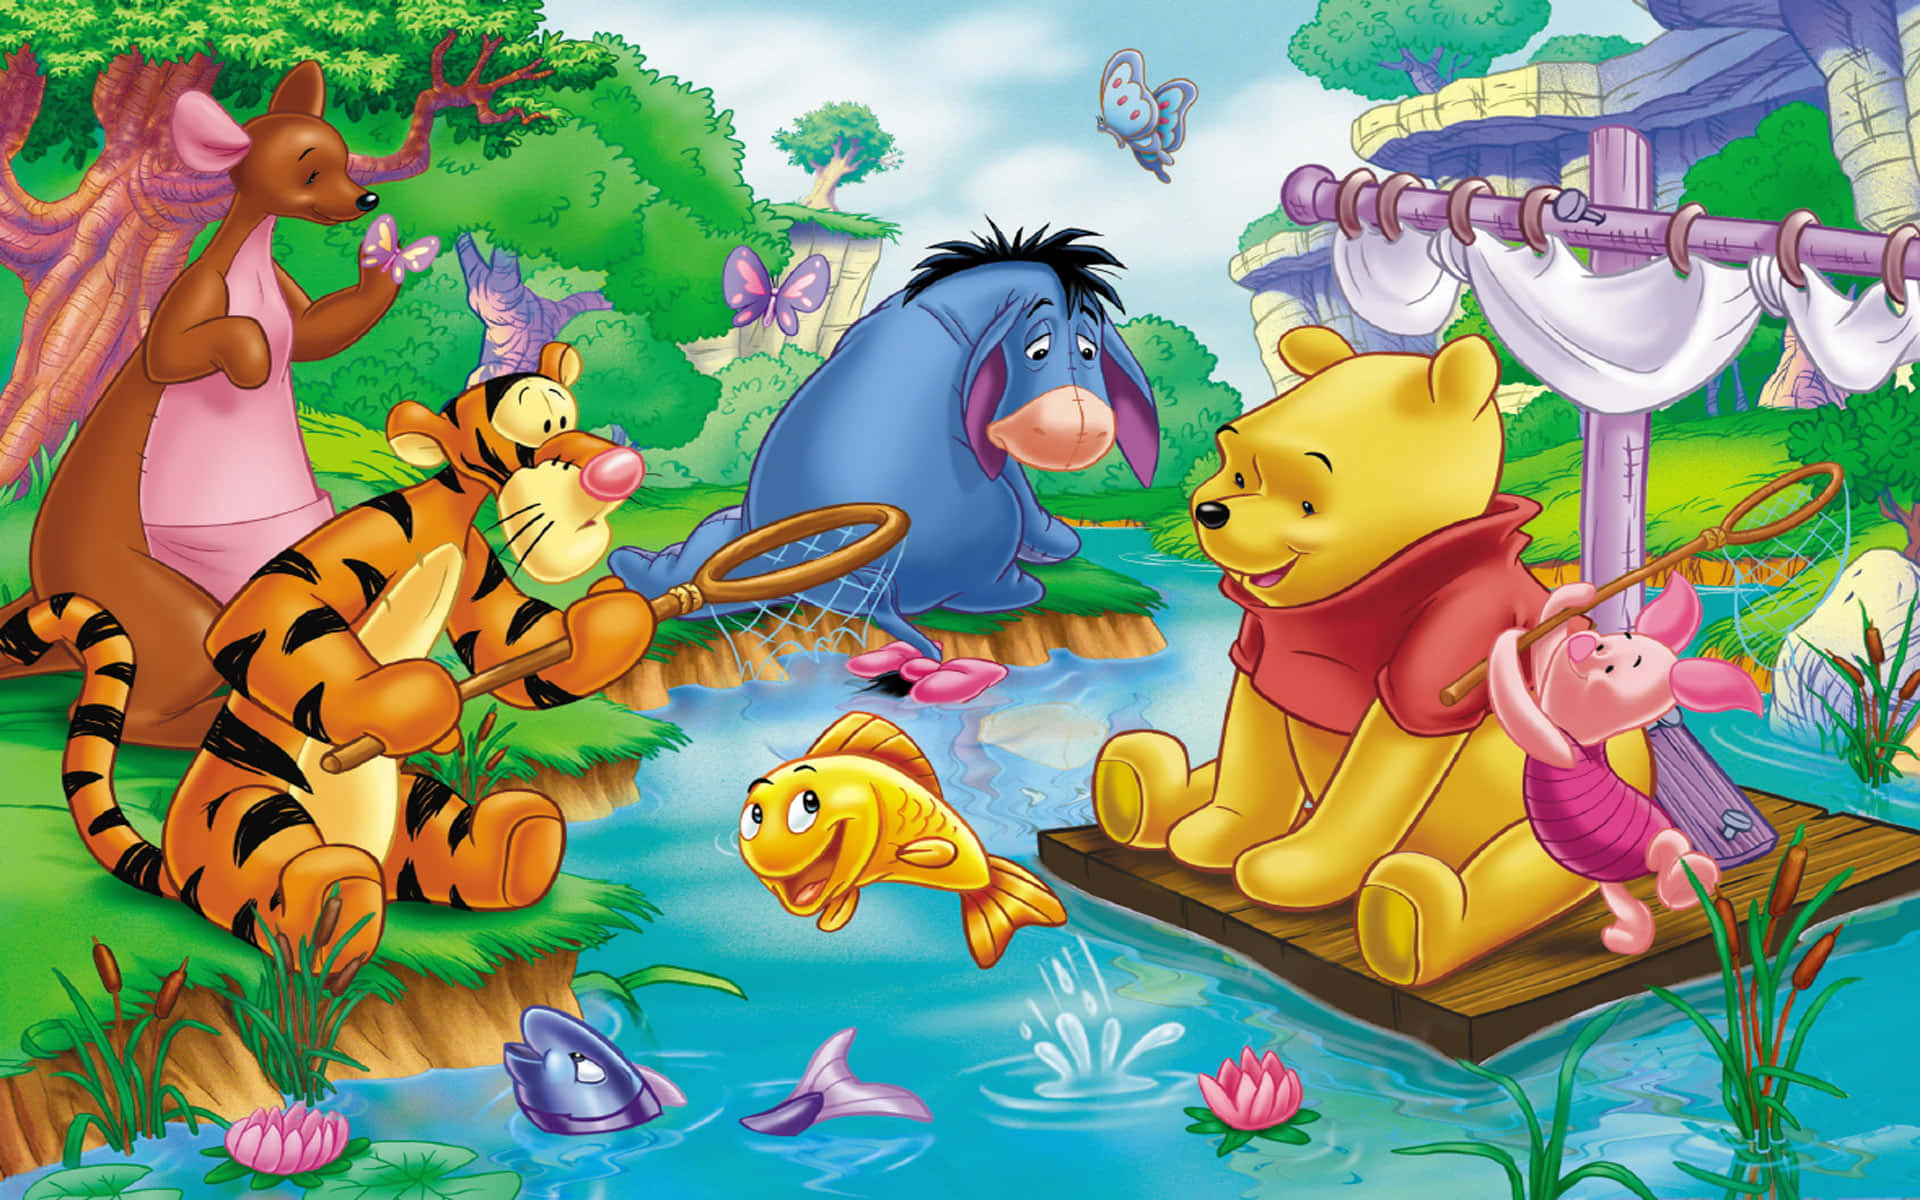 Enjoy sweet moments with Winnie the Pooh on your desktop! Wallpaper